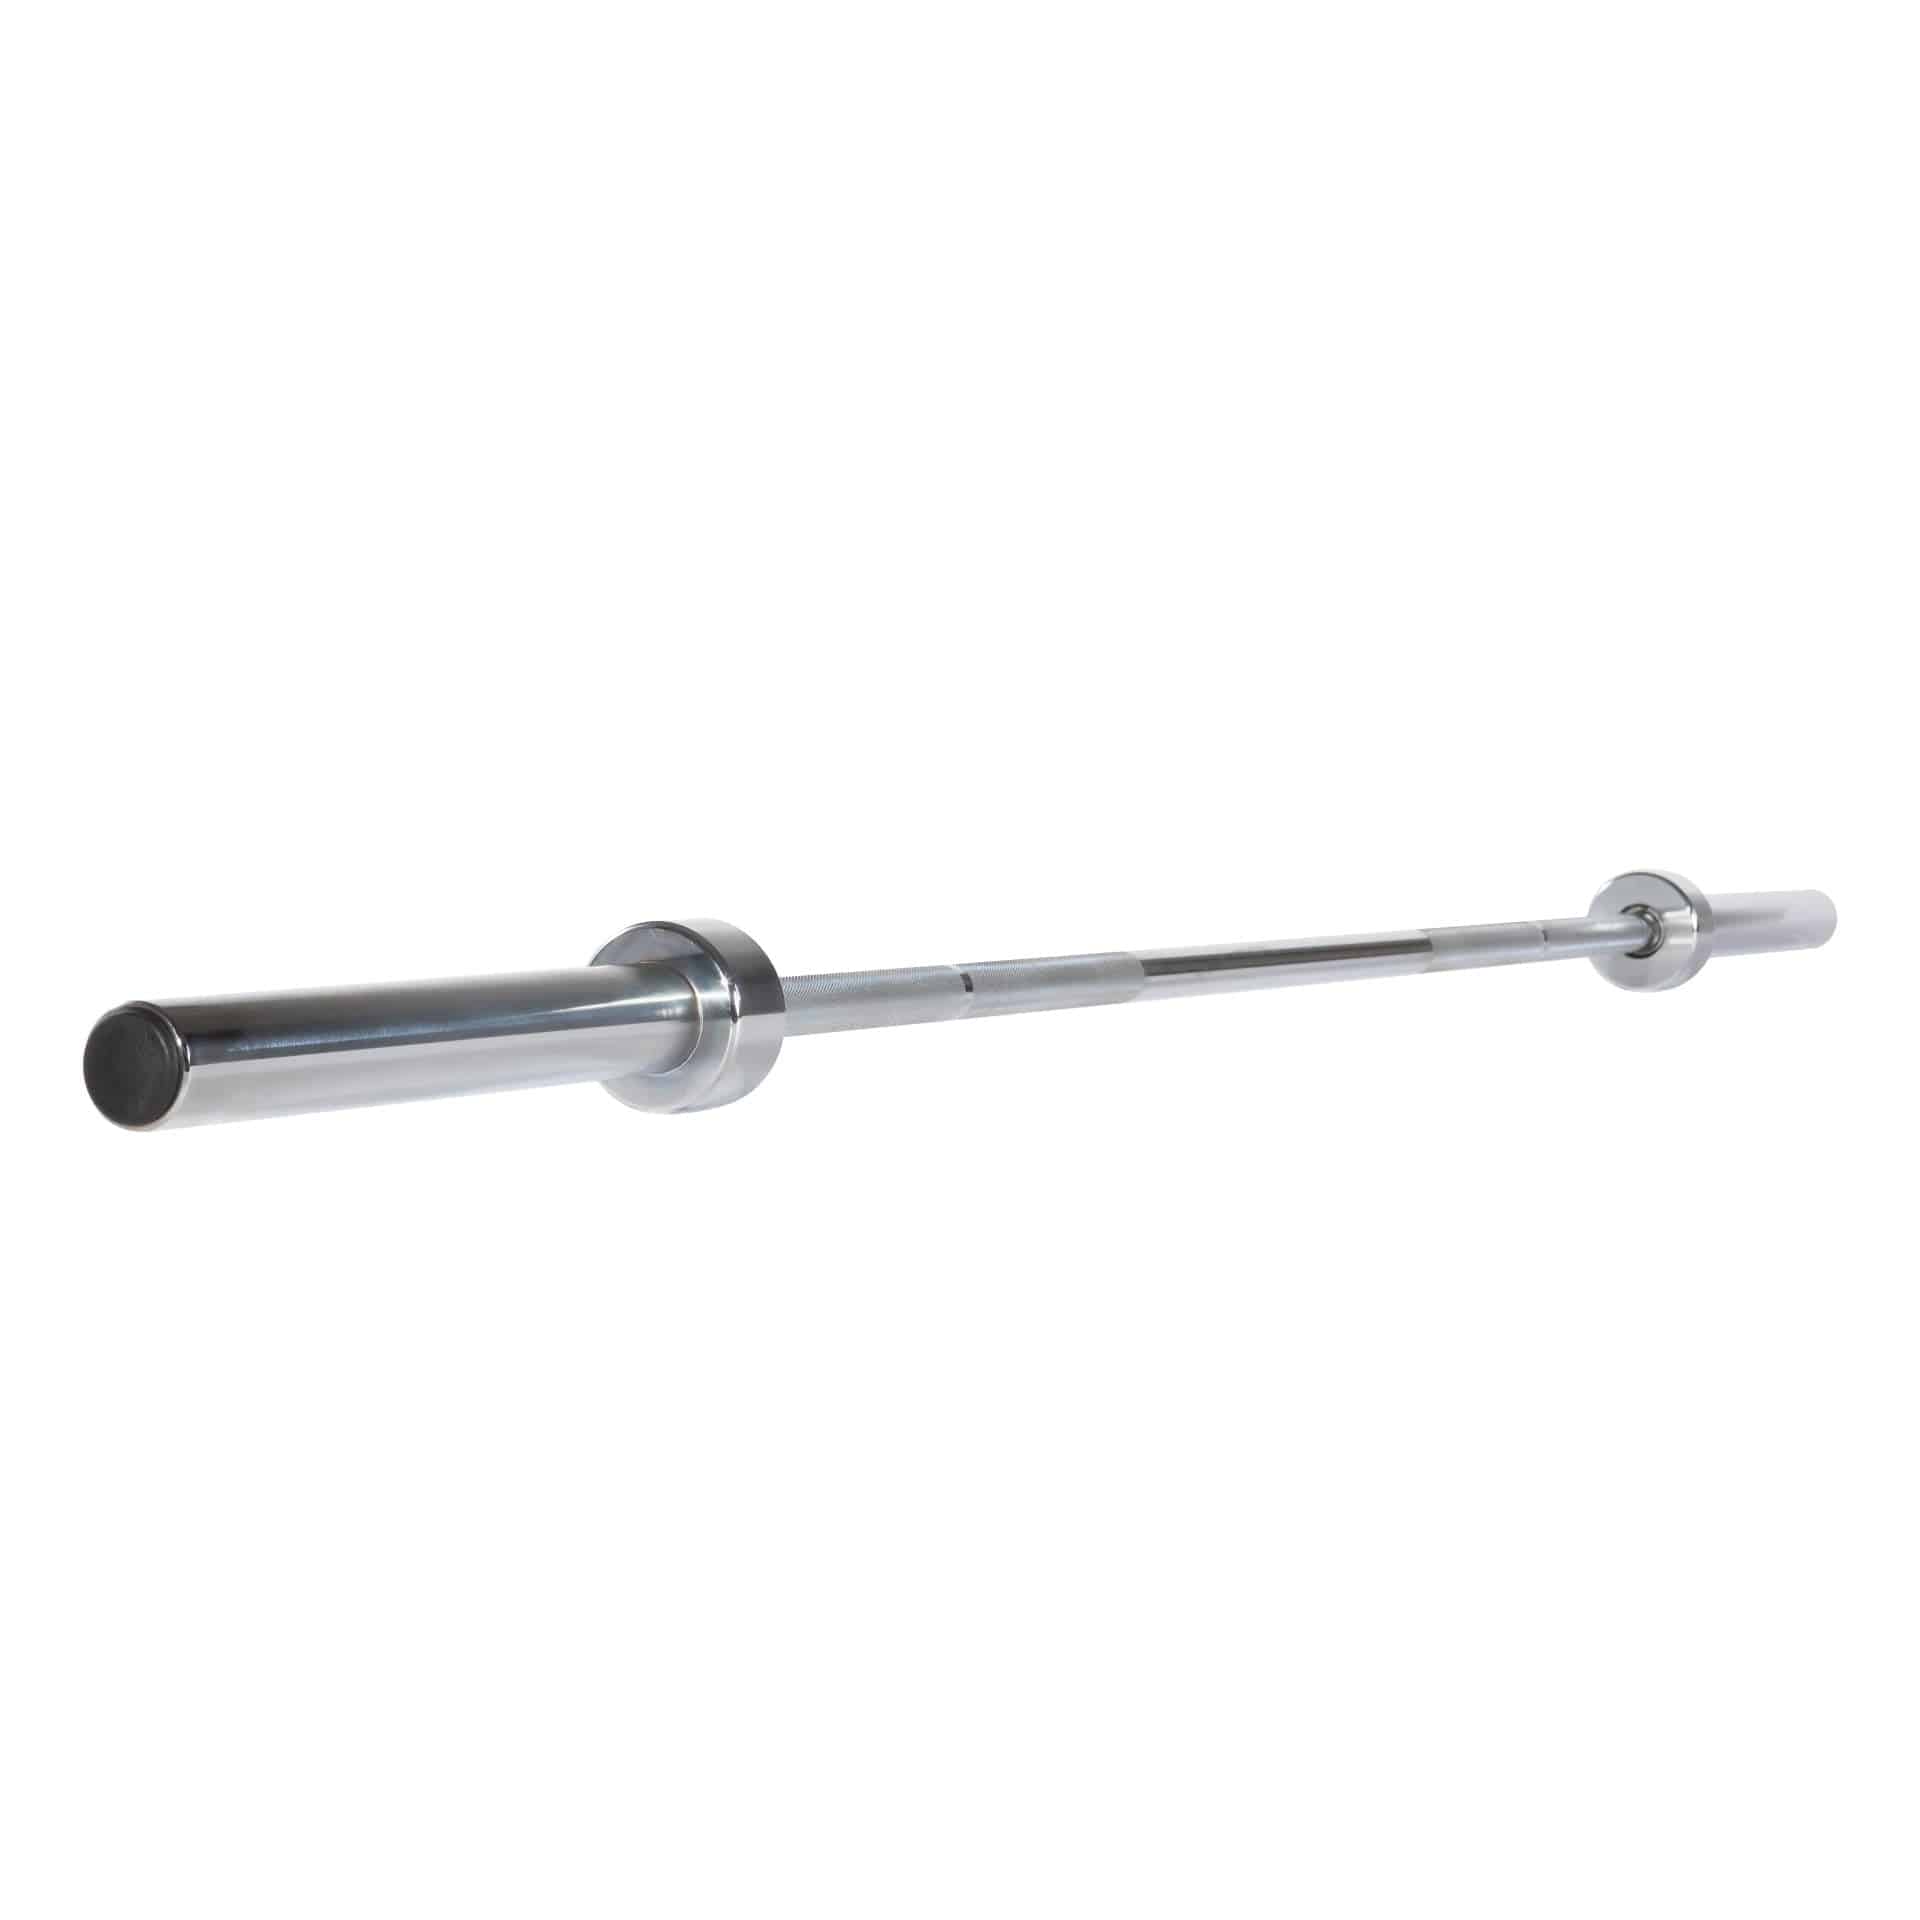 Toorx Olympic Barbell 180cm Malta, Commercial Barbells & Rods Malta  Barbells & Rods Malta